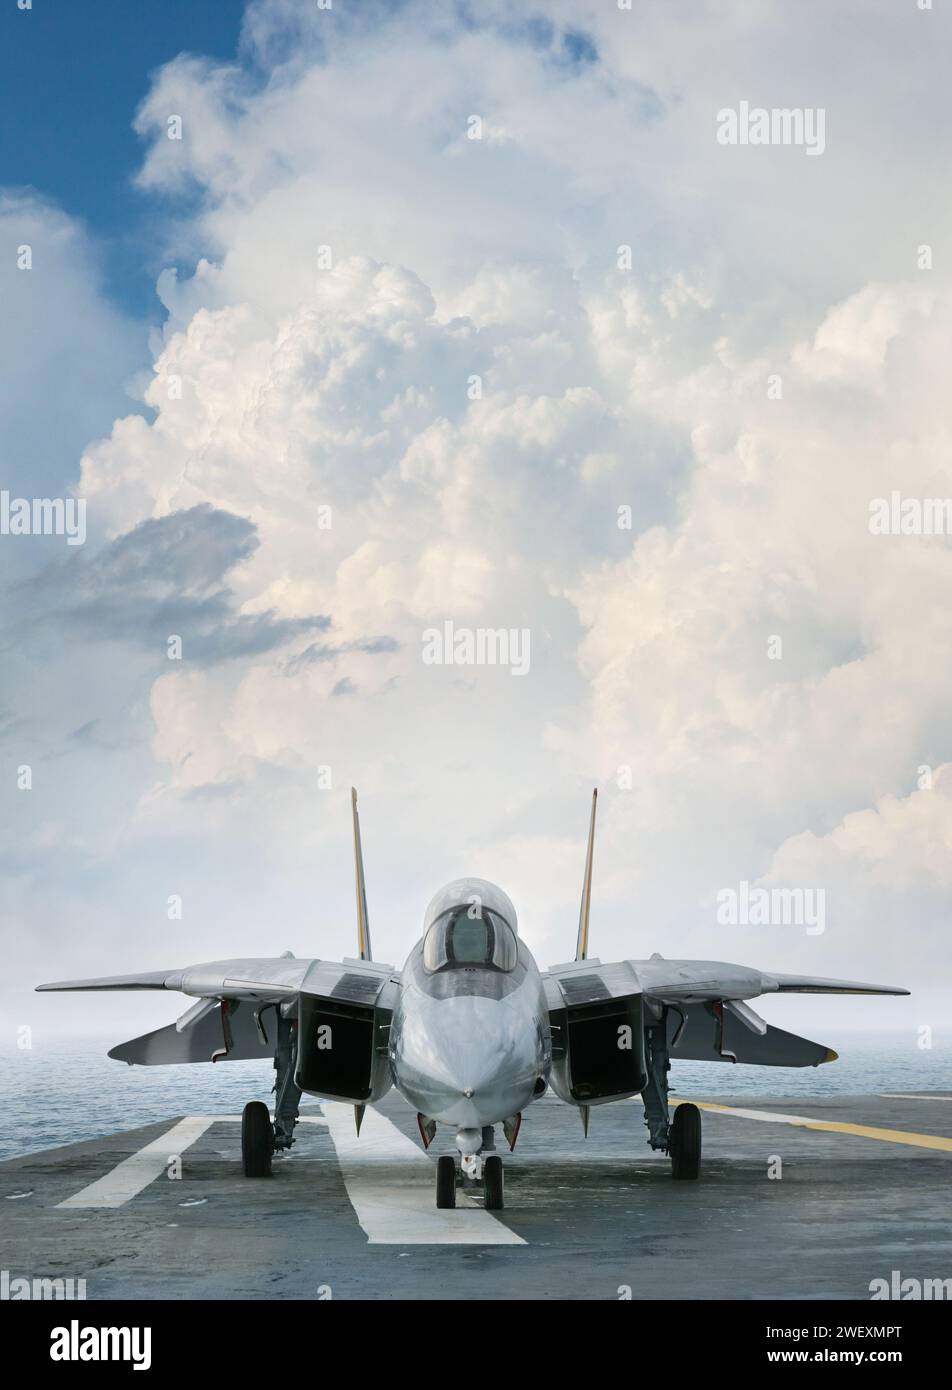 An F-14 jet fighter on an aircraft carrier deck beneath dramatic clouds viewed from front Stock Photo